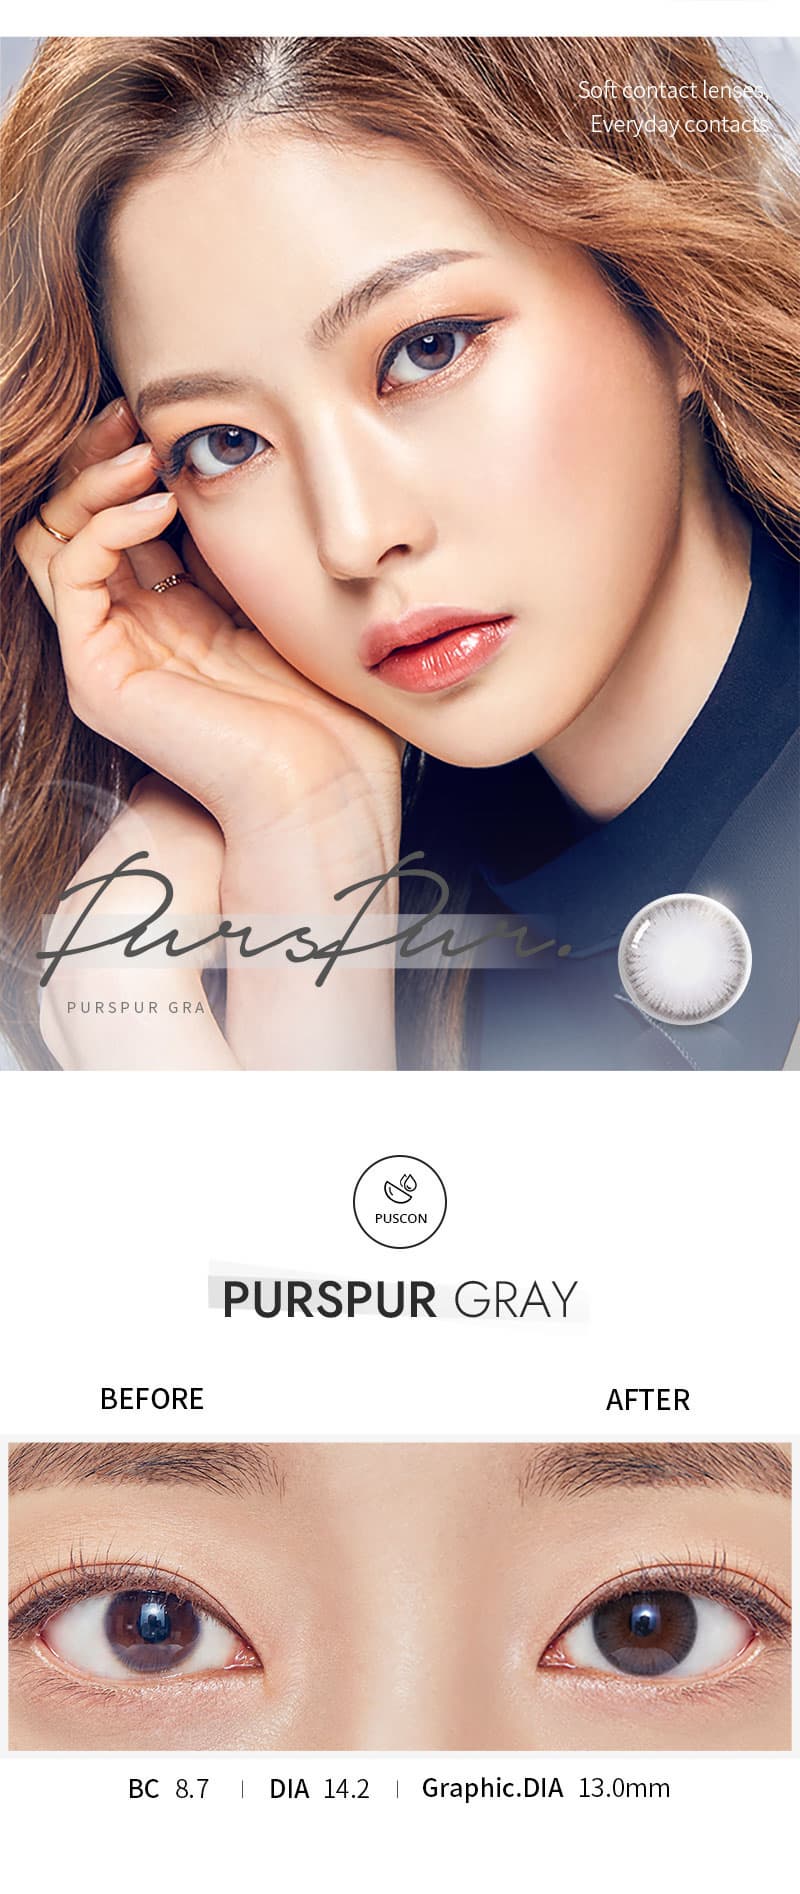 Contact Lens _Purspur Gray_